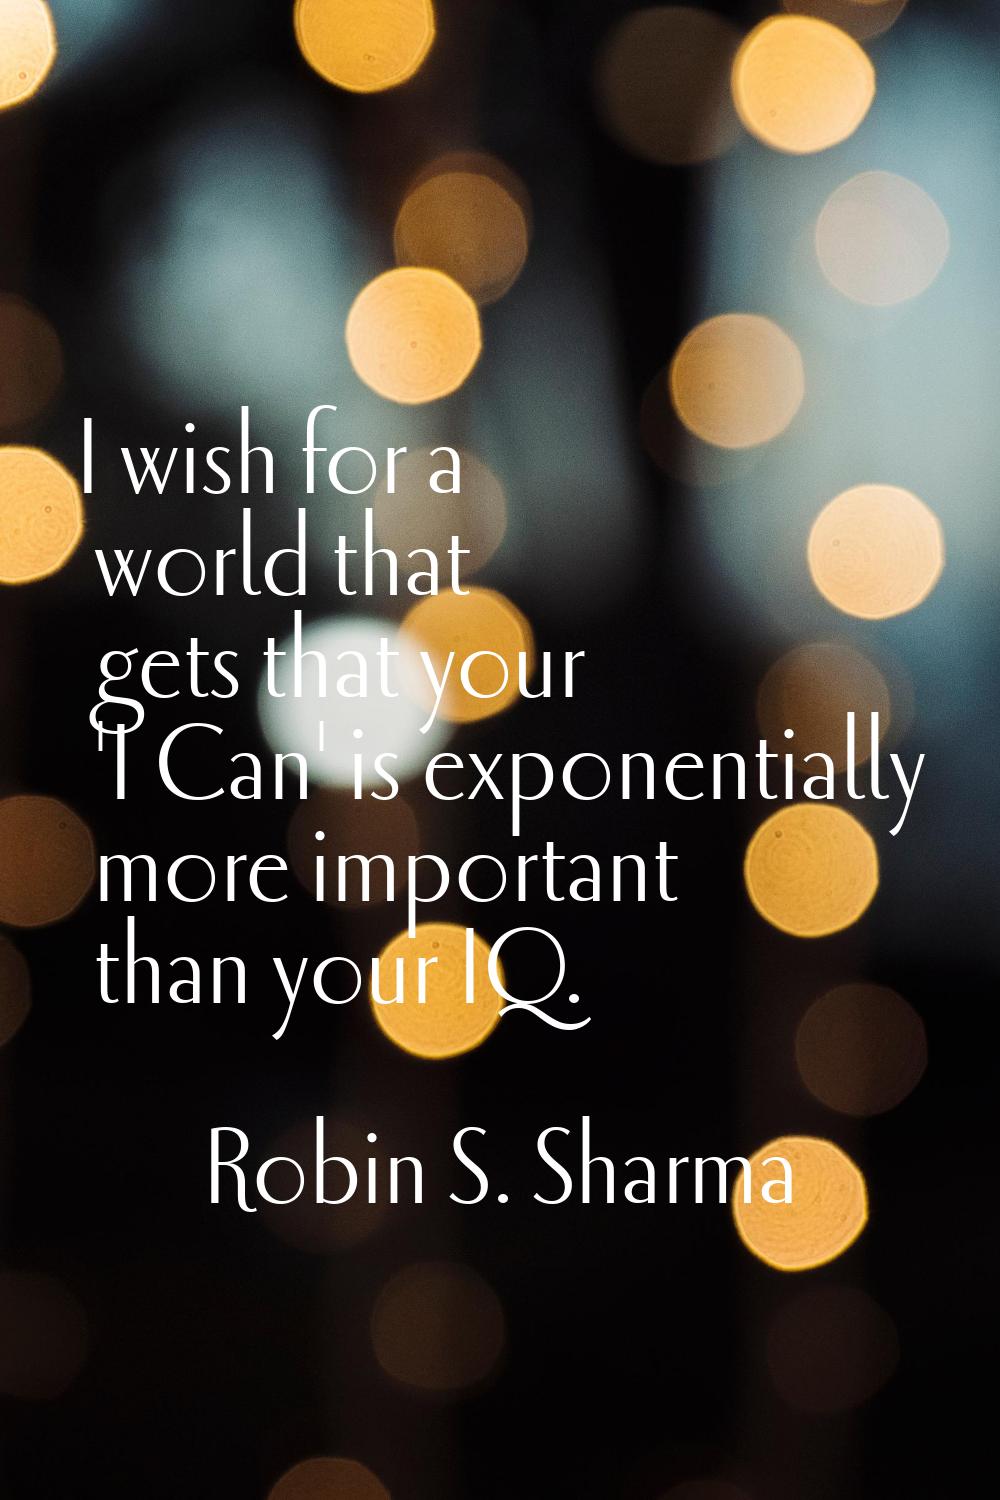 I wish for a world that gets that your 'I Can' is exponentially more important than your IQ.